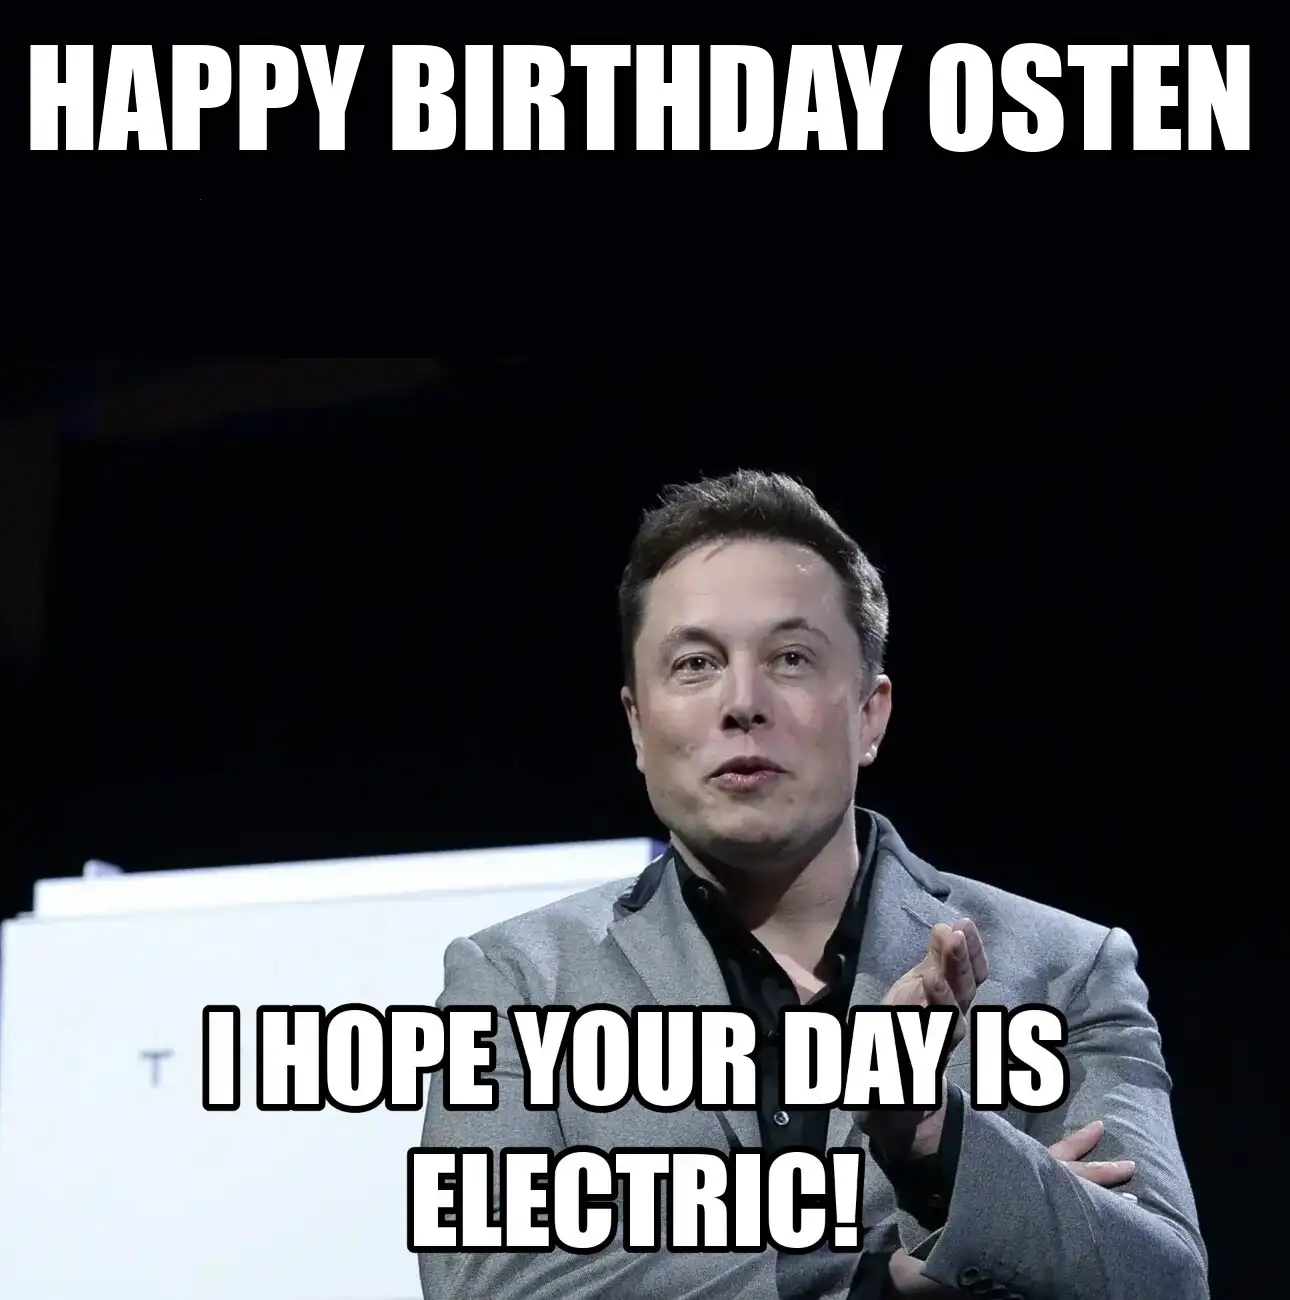 Happy Birthday Osten I Hope Your Day Is Electric Meme